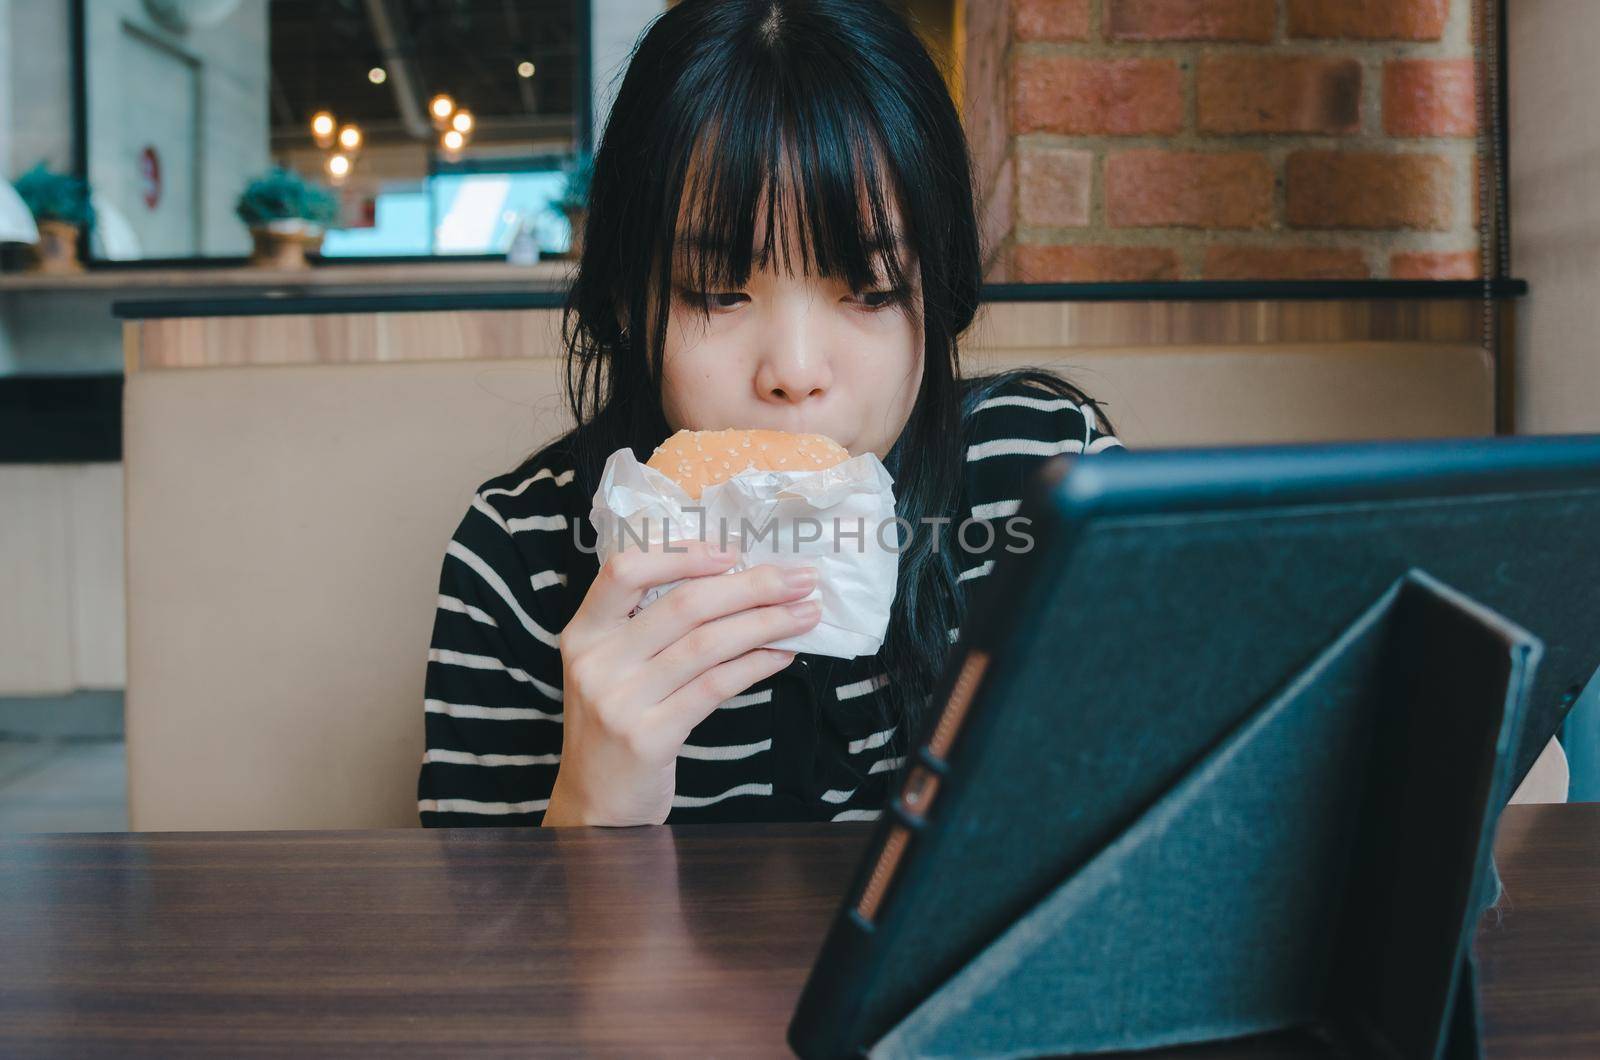 young girl is eating a hamburger and watching an online social media tech tablet on the table.